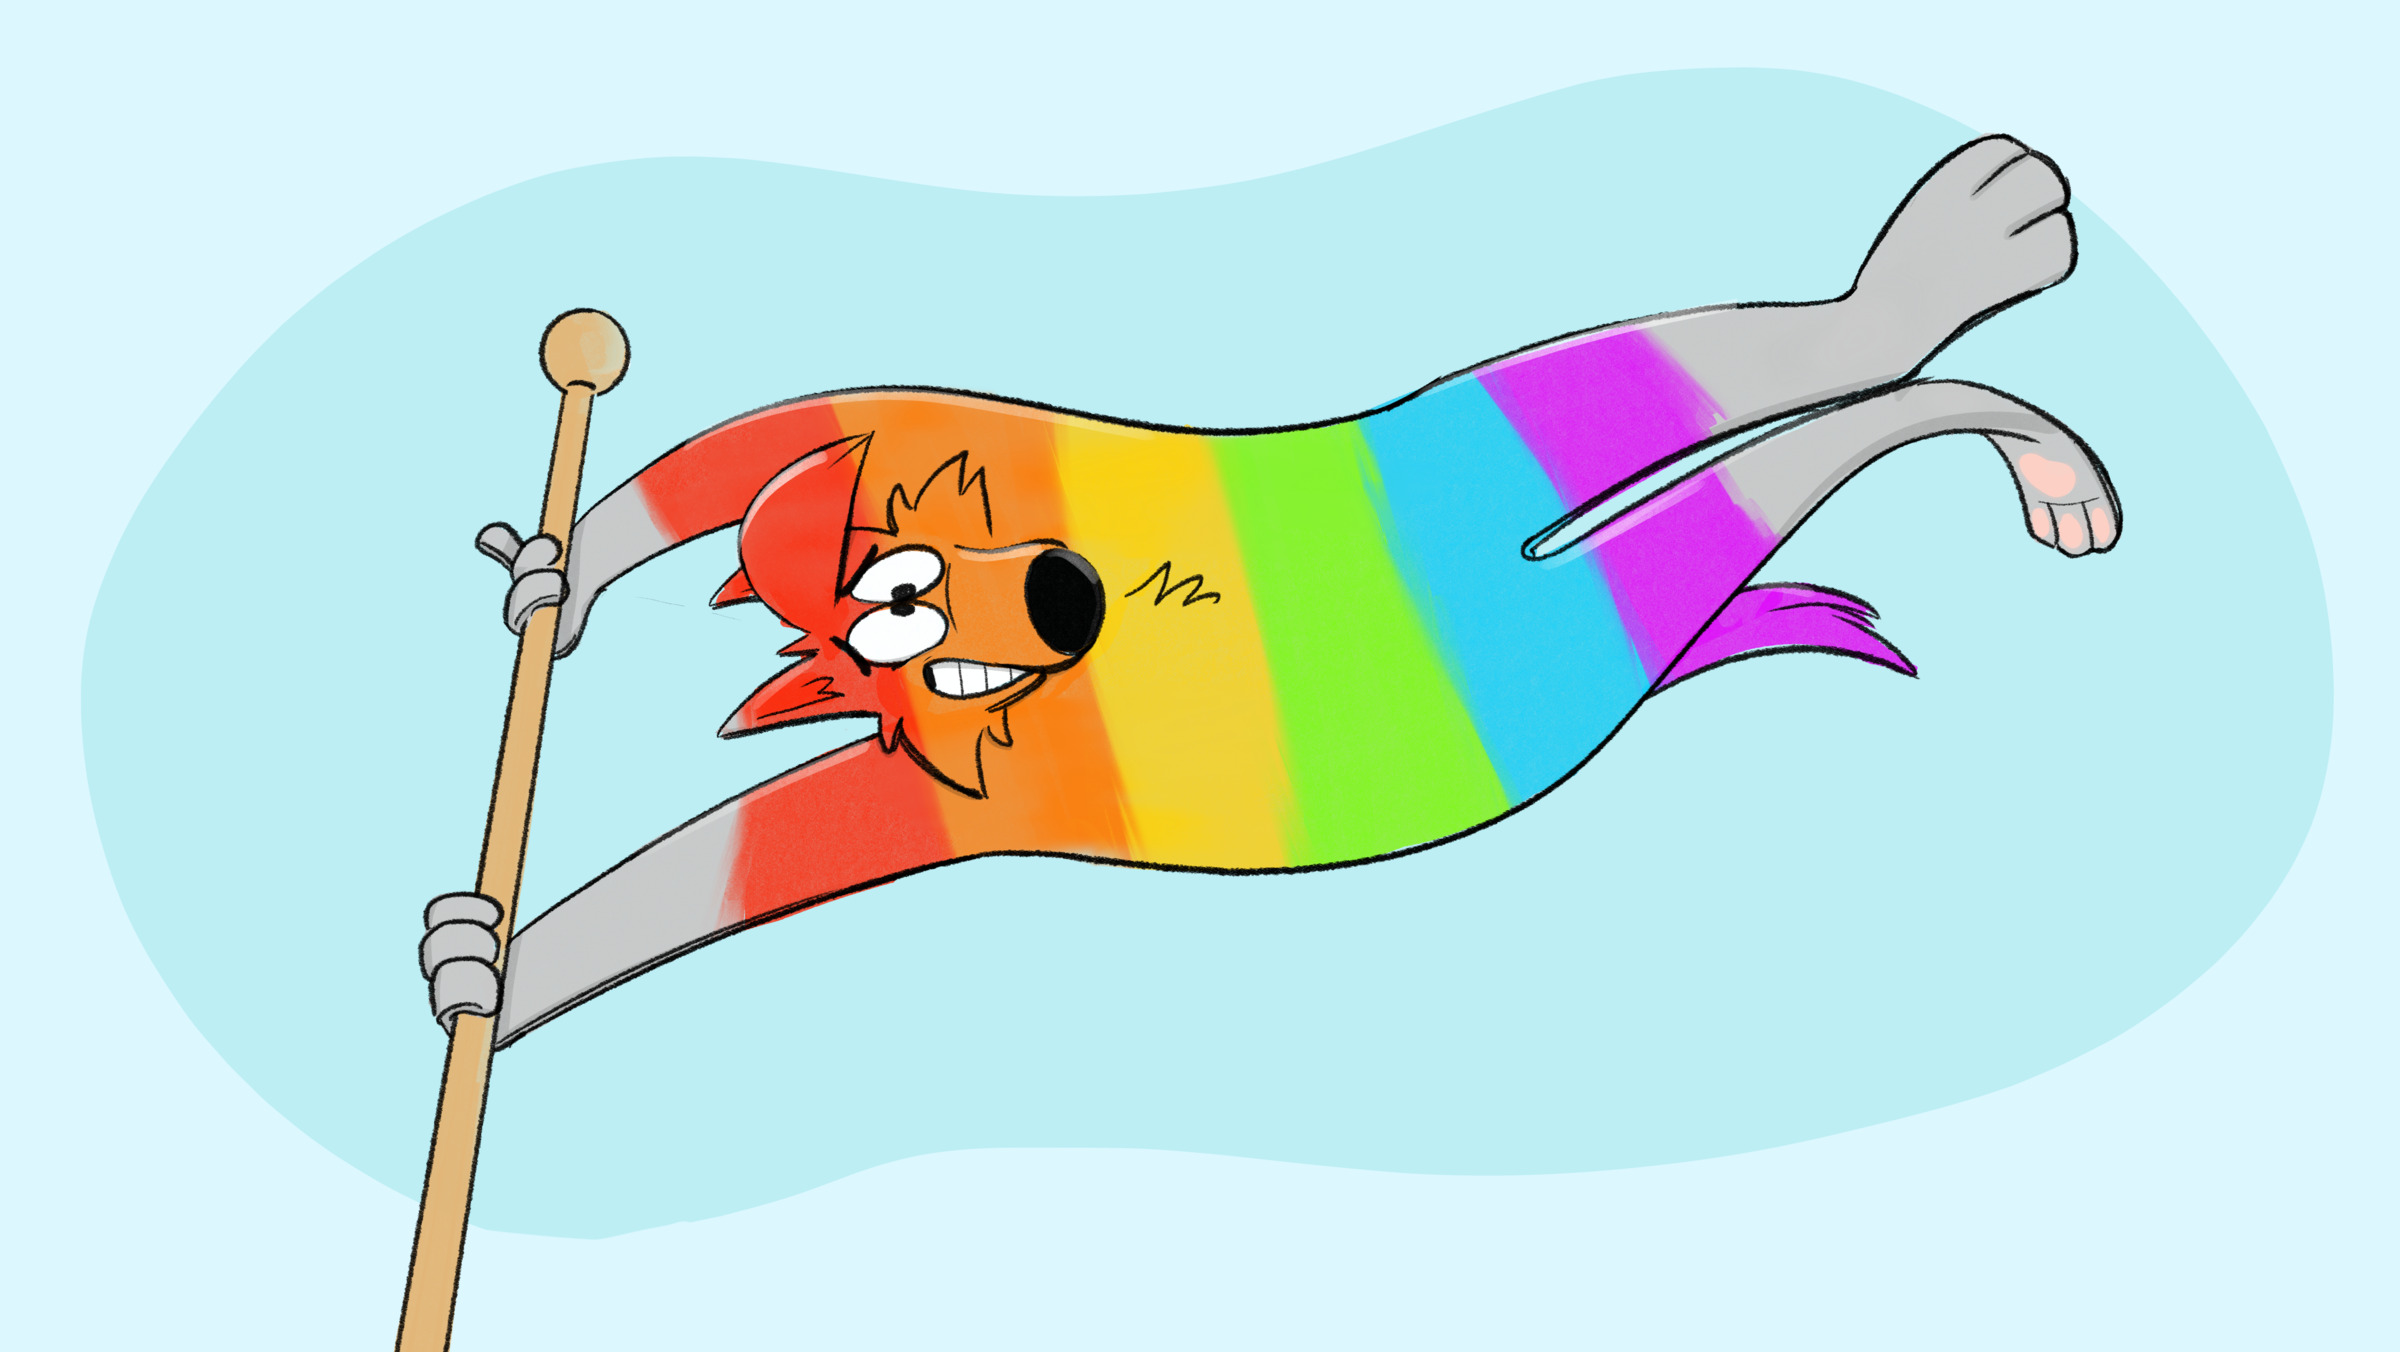 A flat wolf painted in the colours of the LGBT pride flag, holding on to a flagpole